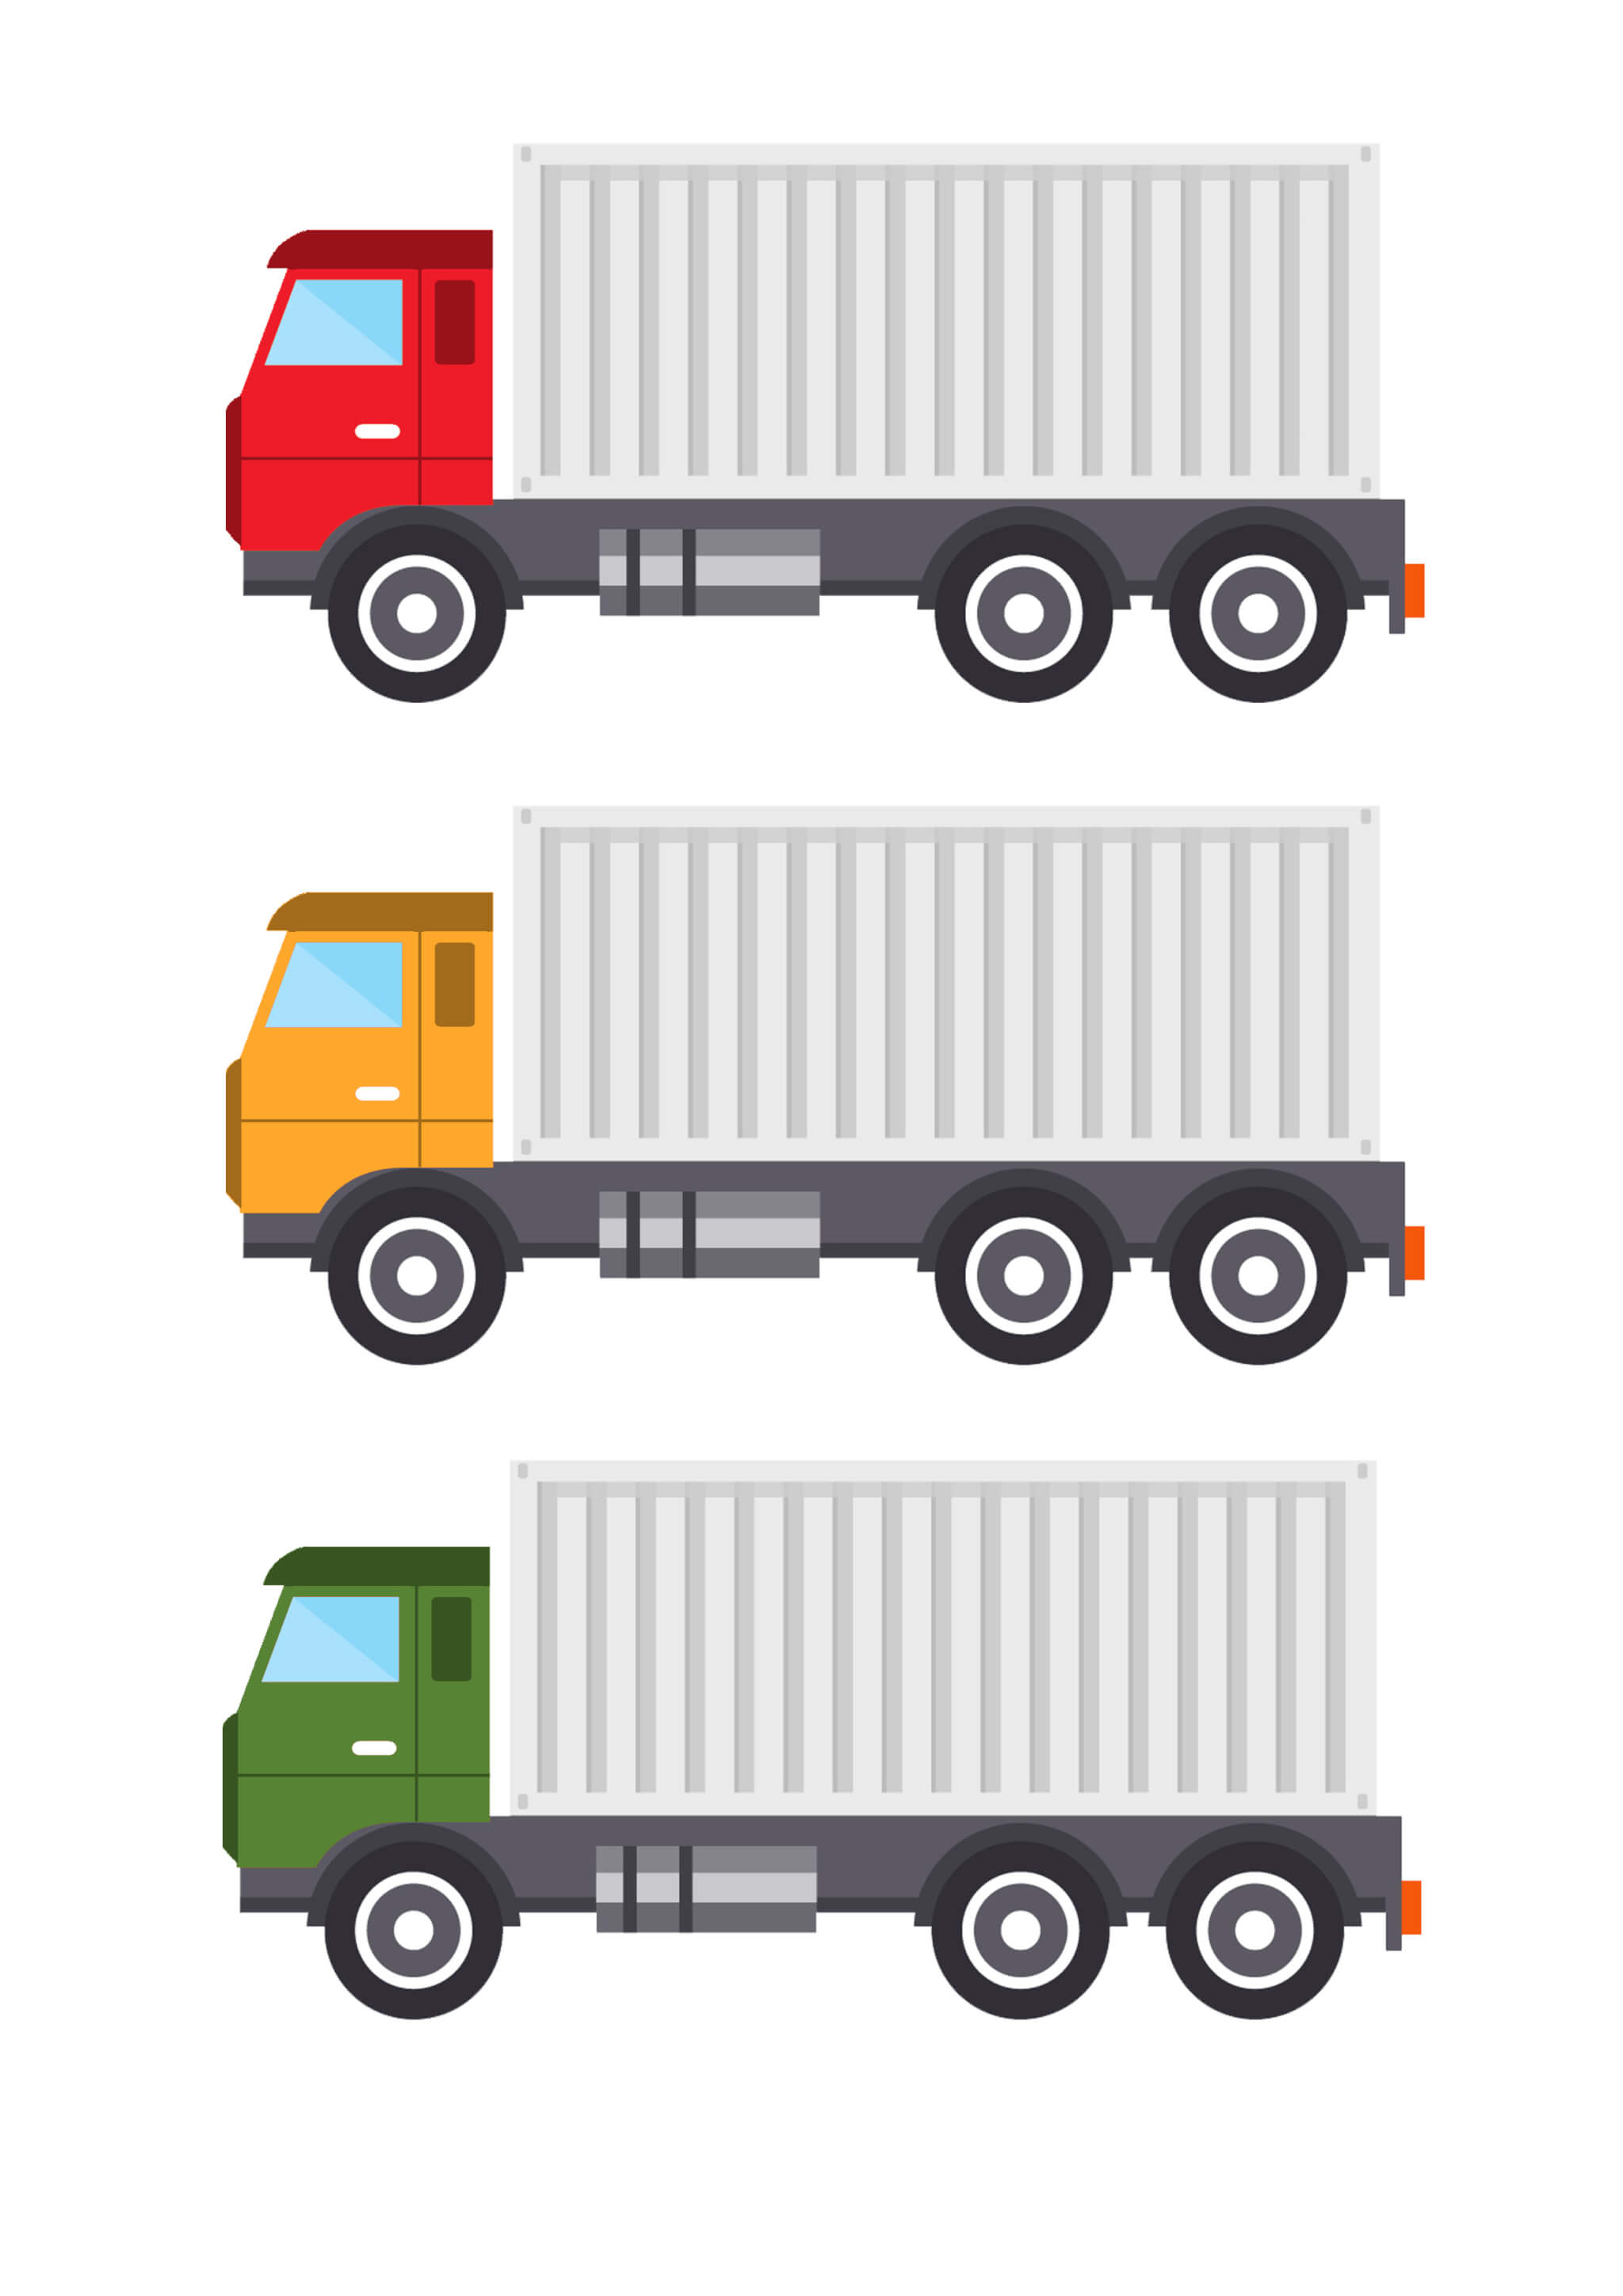 Printable Activity «What is carrying a truck?» - Image 2